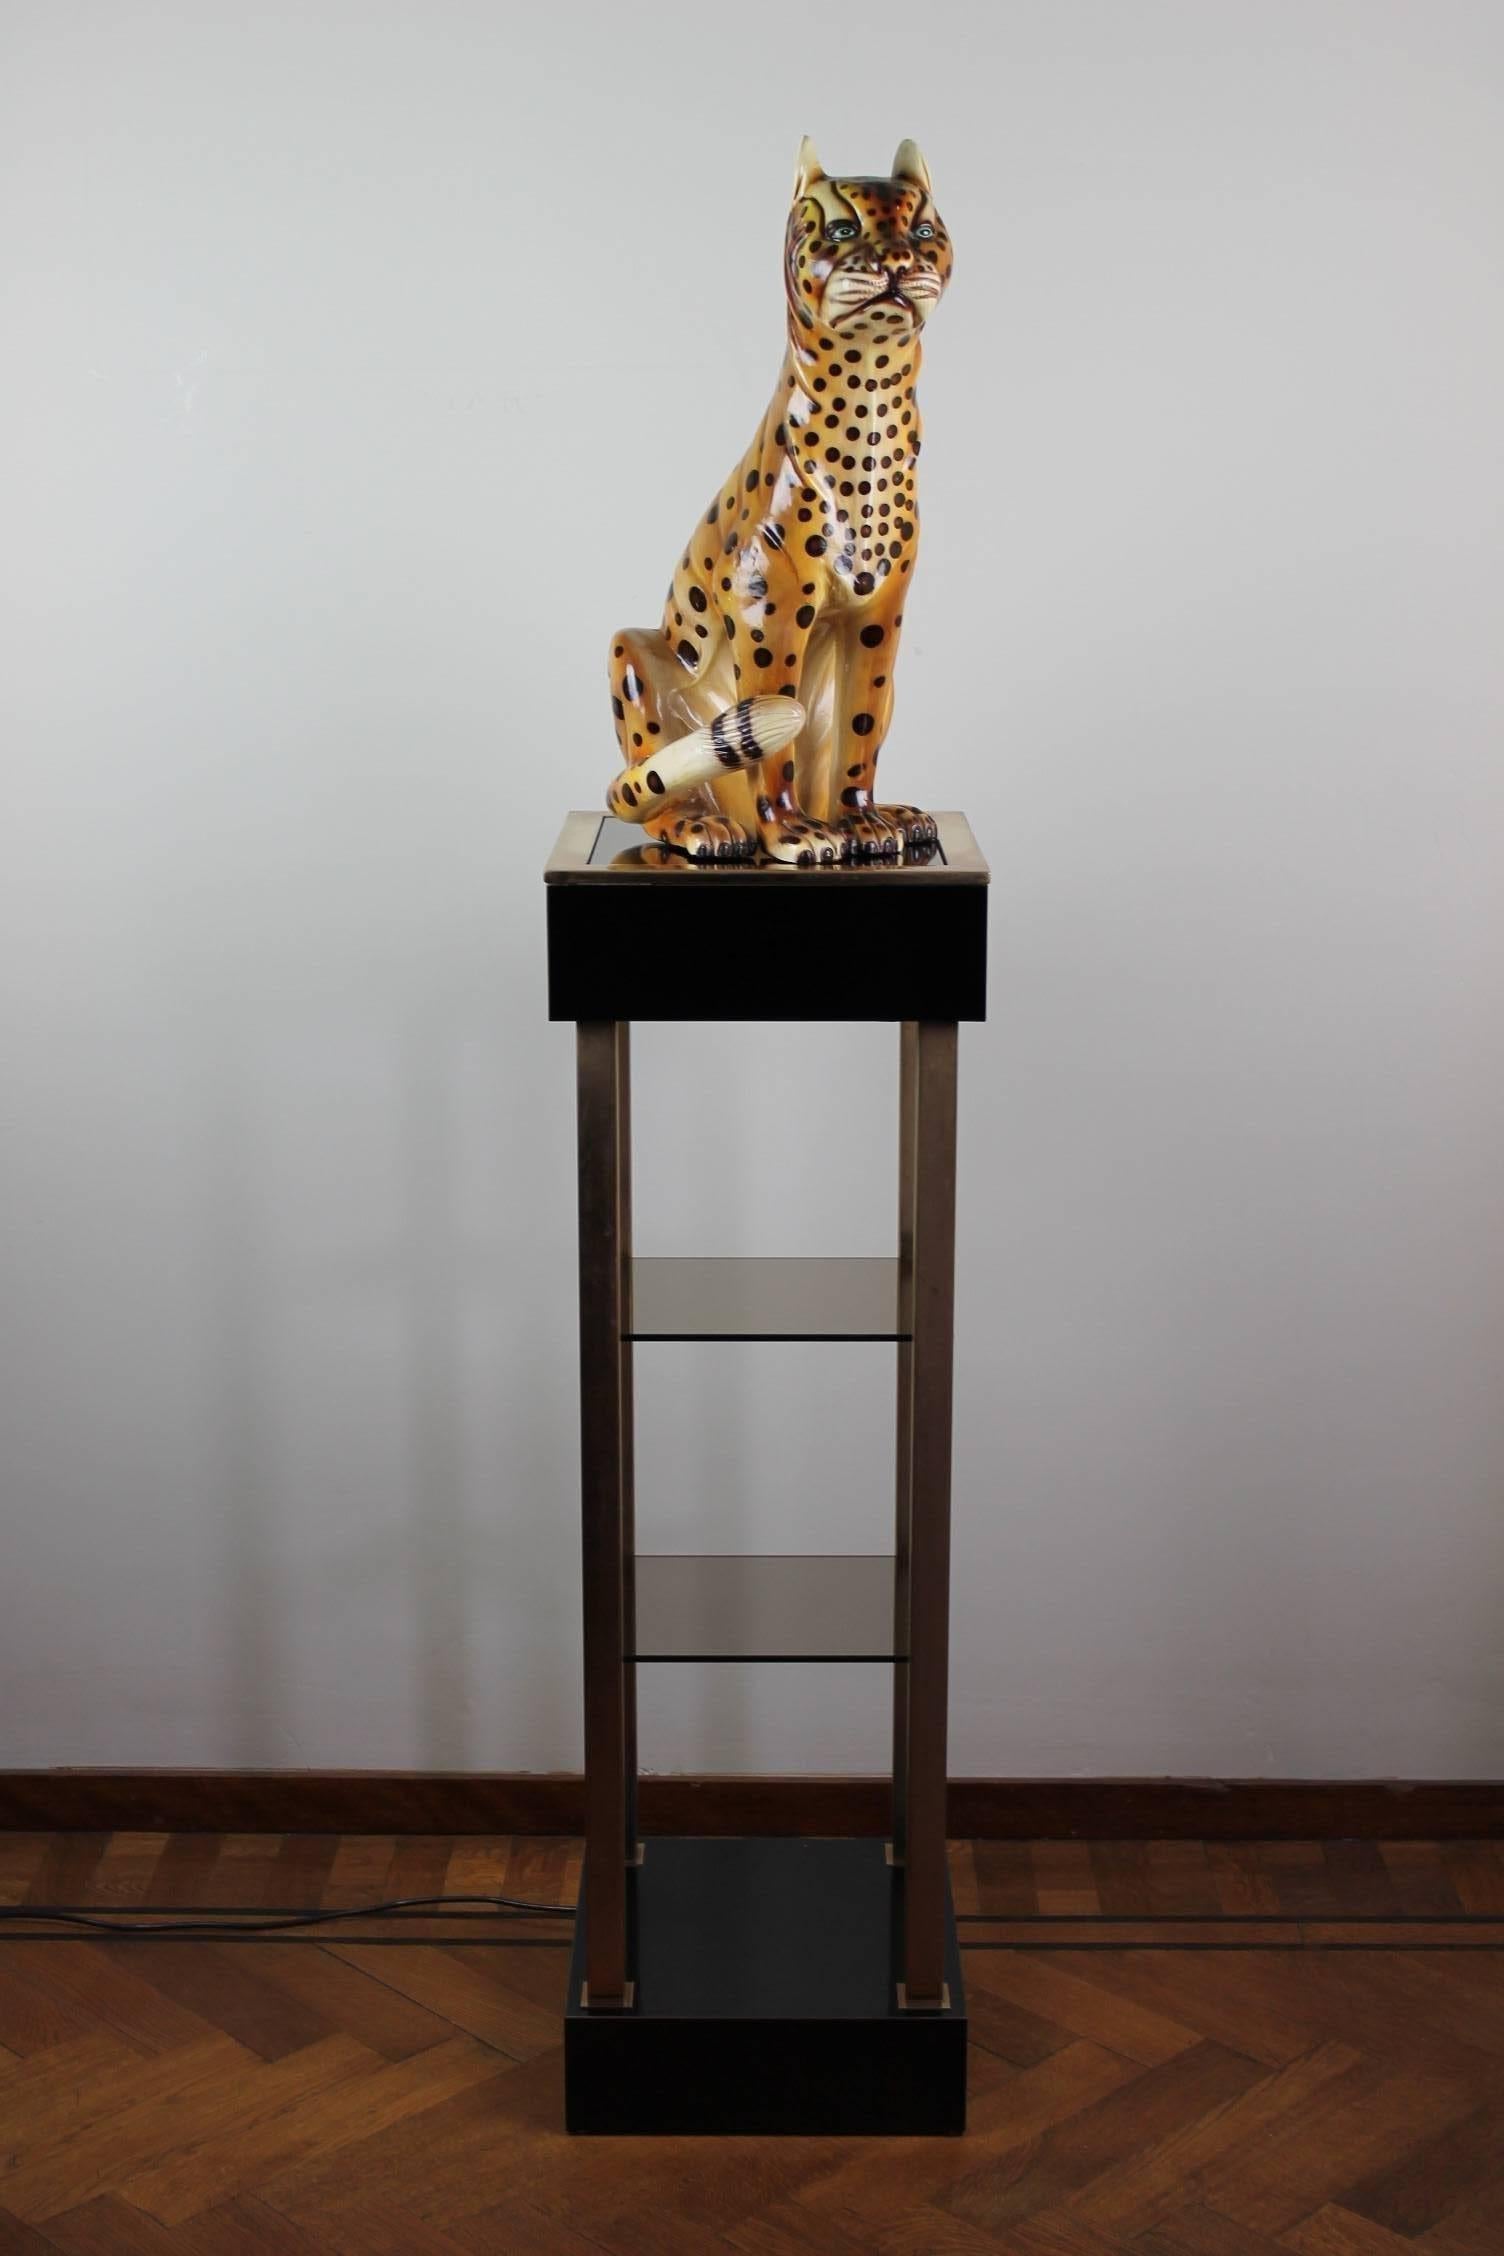 Elegant sitting vintage ceramic female cheetah cat - leopard figurine, animal statue with blue eyes and natural colors. Dates from the 1960s.
Stylish hand-painted big cheetah figurine to present on a sideboard, showcase, buffet or to use as a floor